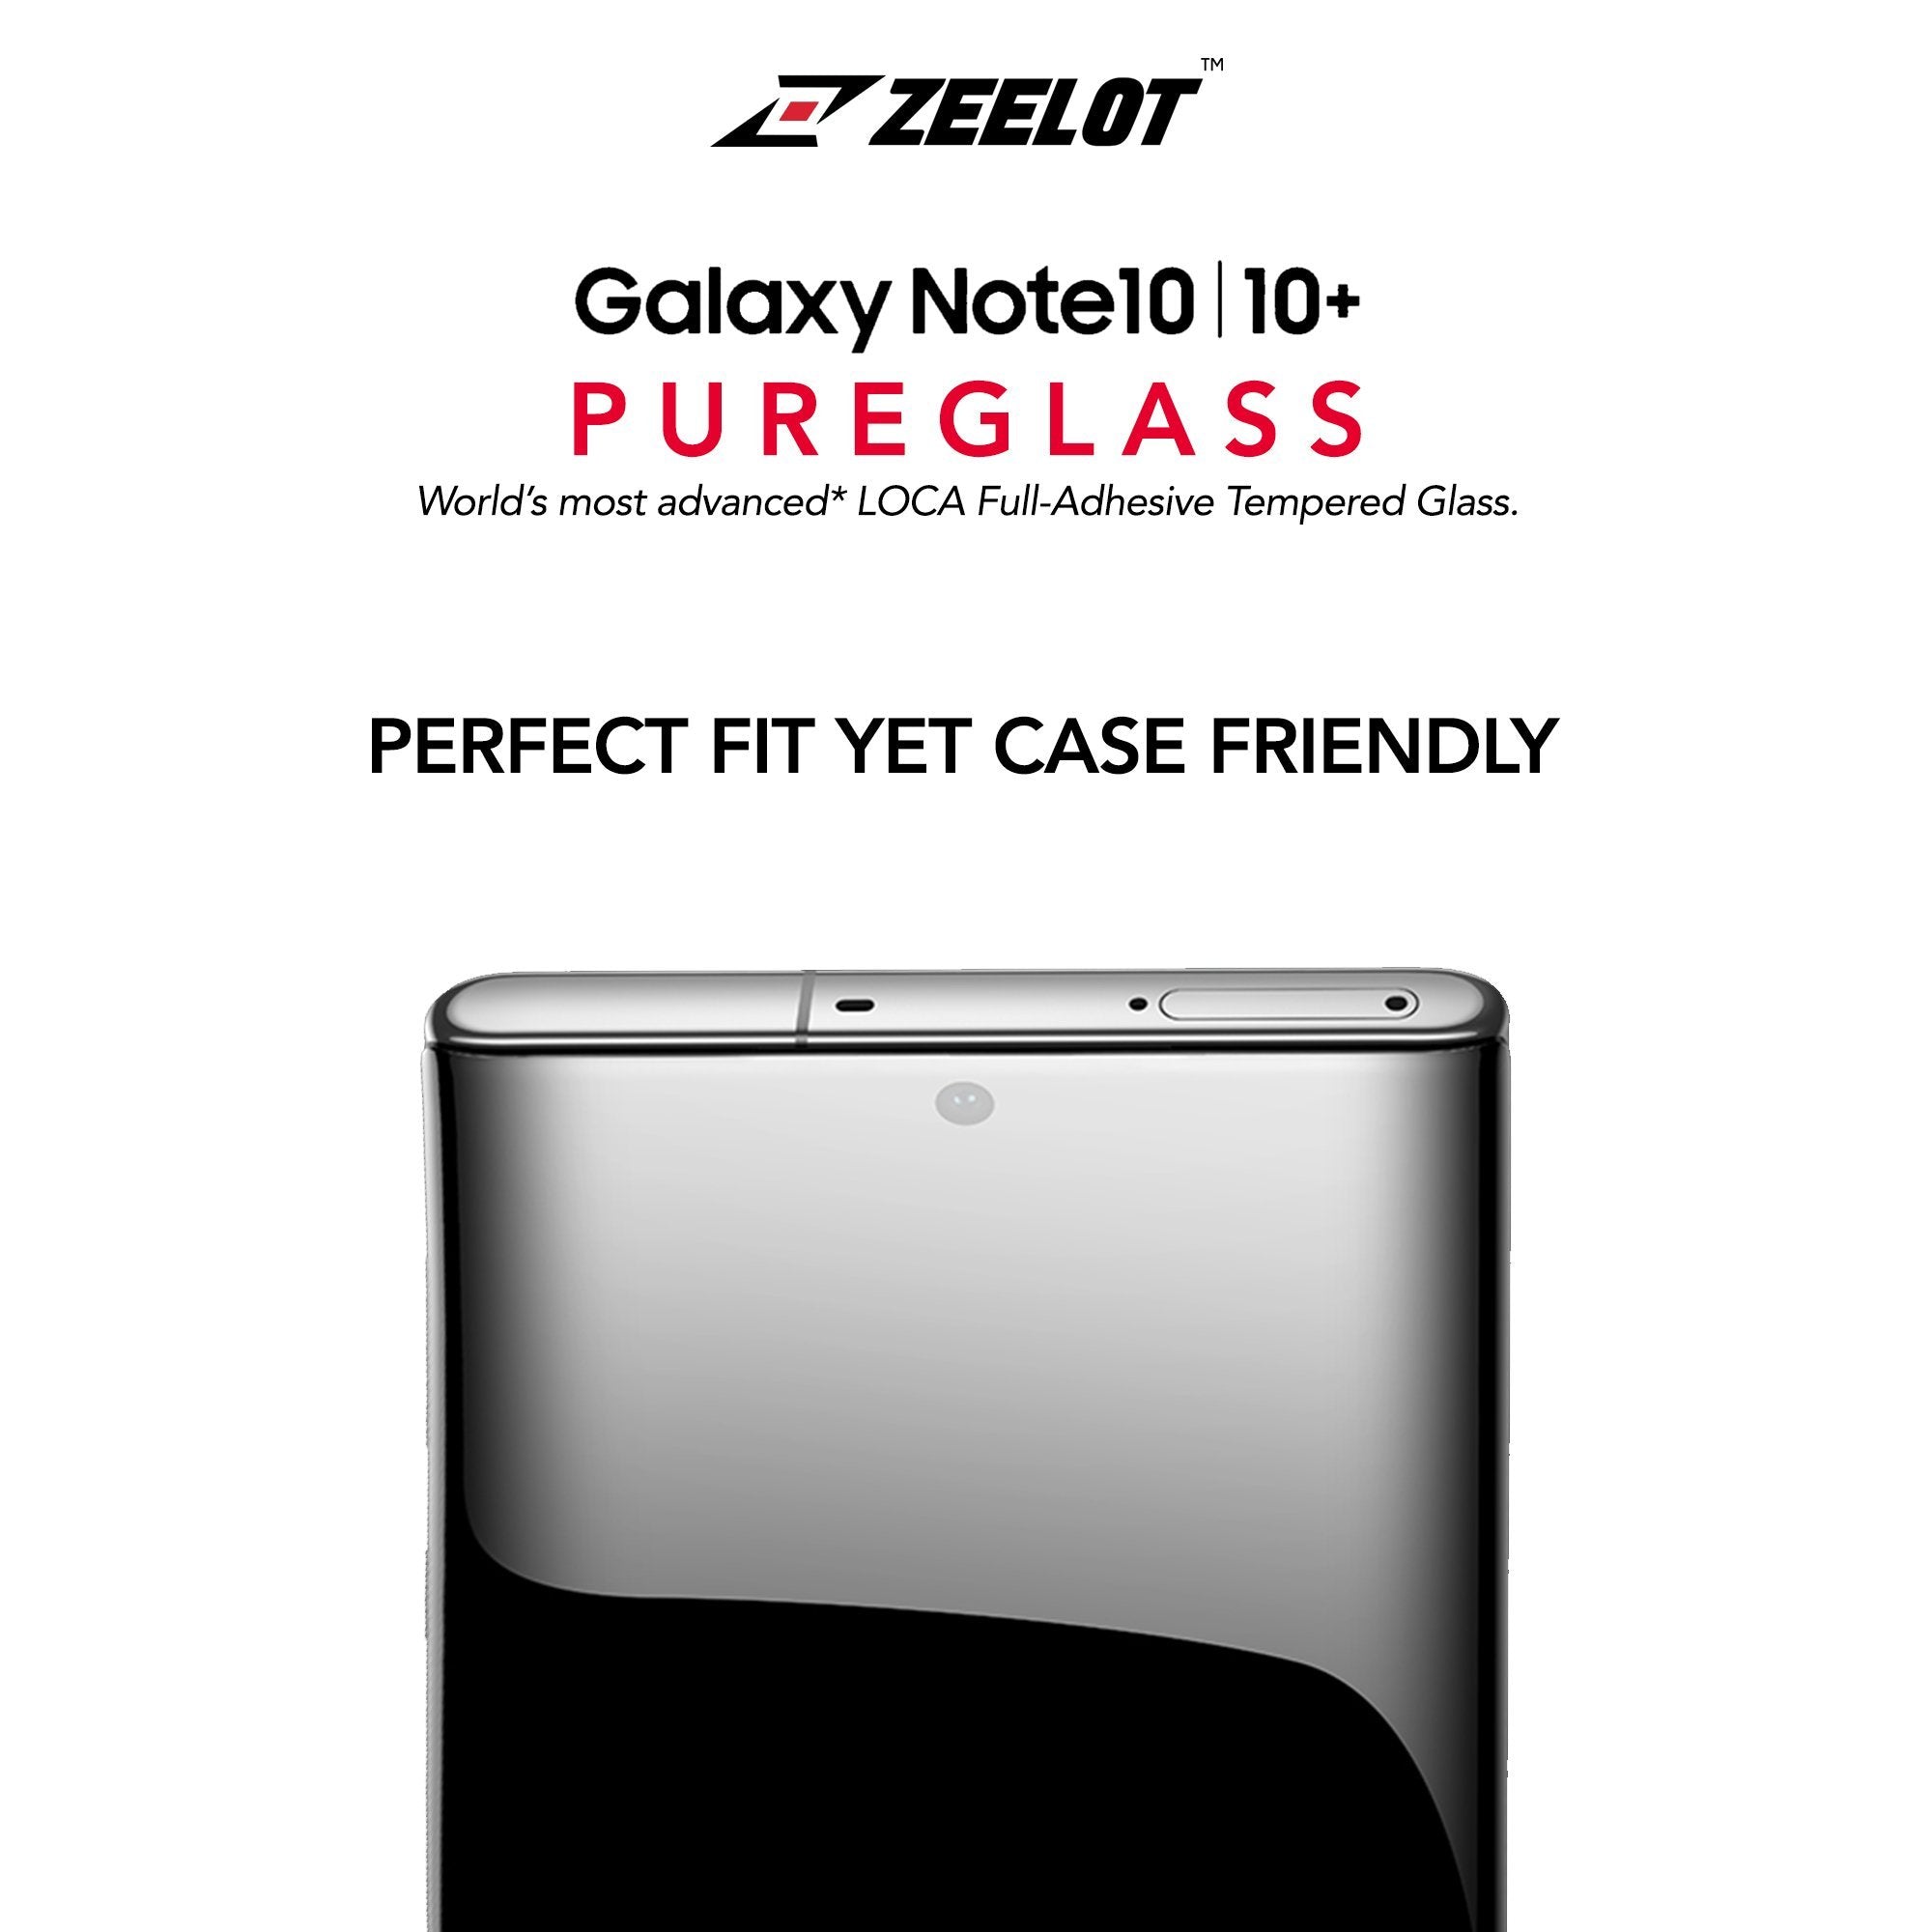 ZEELOT PureGlass 3D LOCA Tempered Glass Screen Protector for Samsung Galaxy Note 10 Plus, Clear LOCA Tempered Glass ZEELOT 